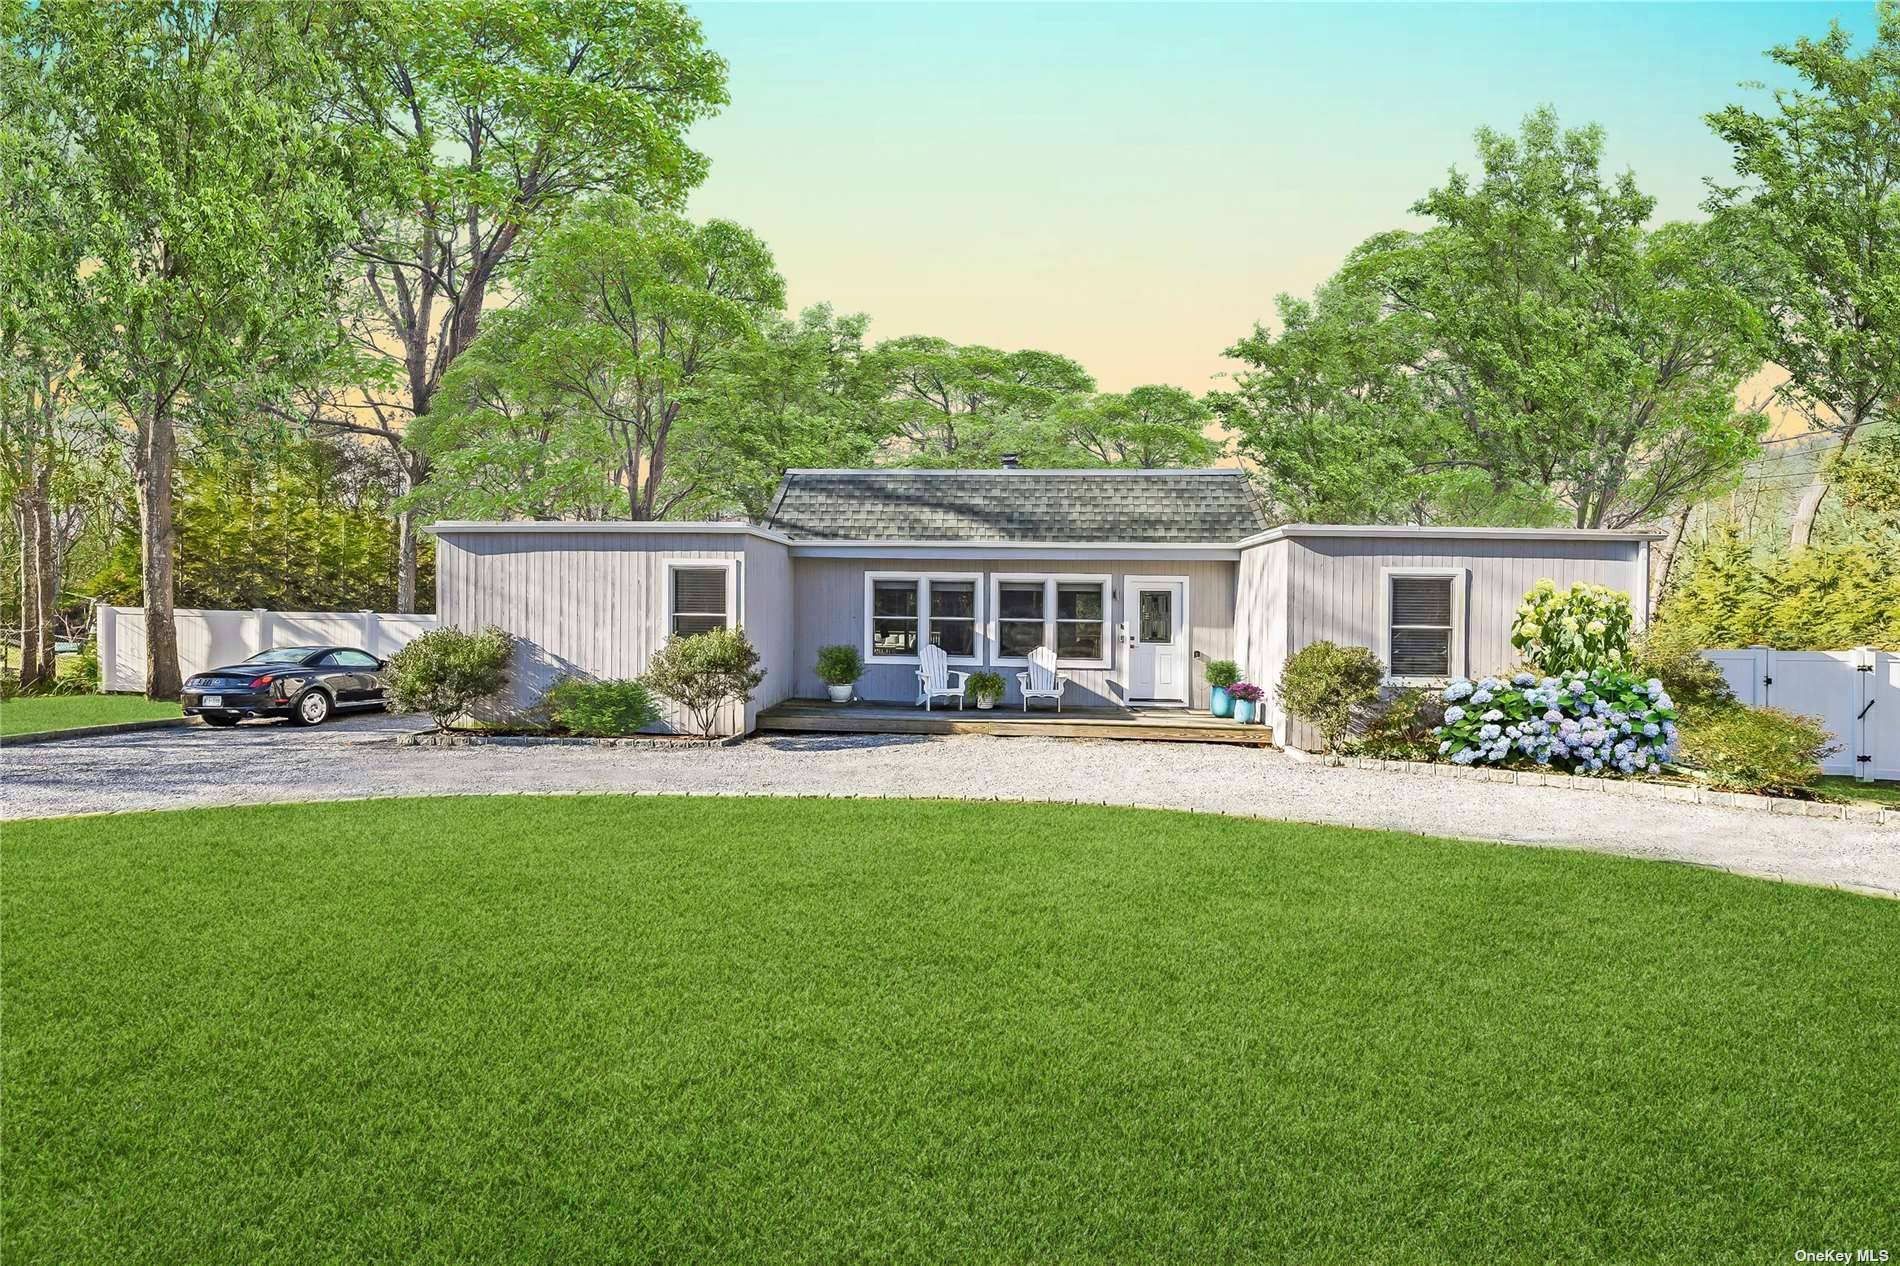 Introducing 6 Foxboro Rd, East Quogue !